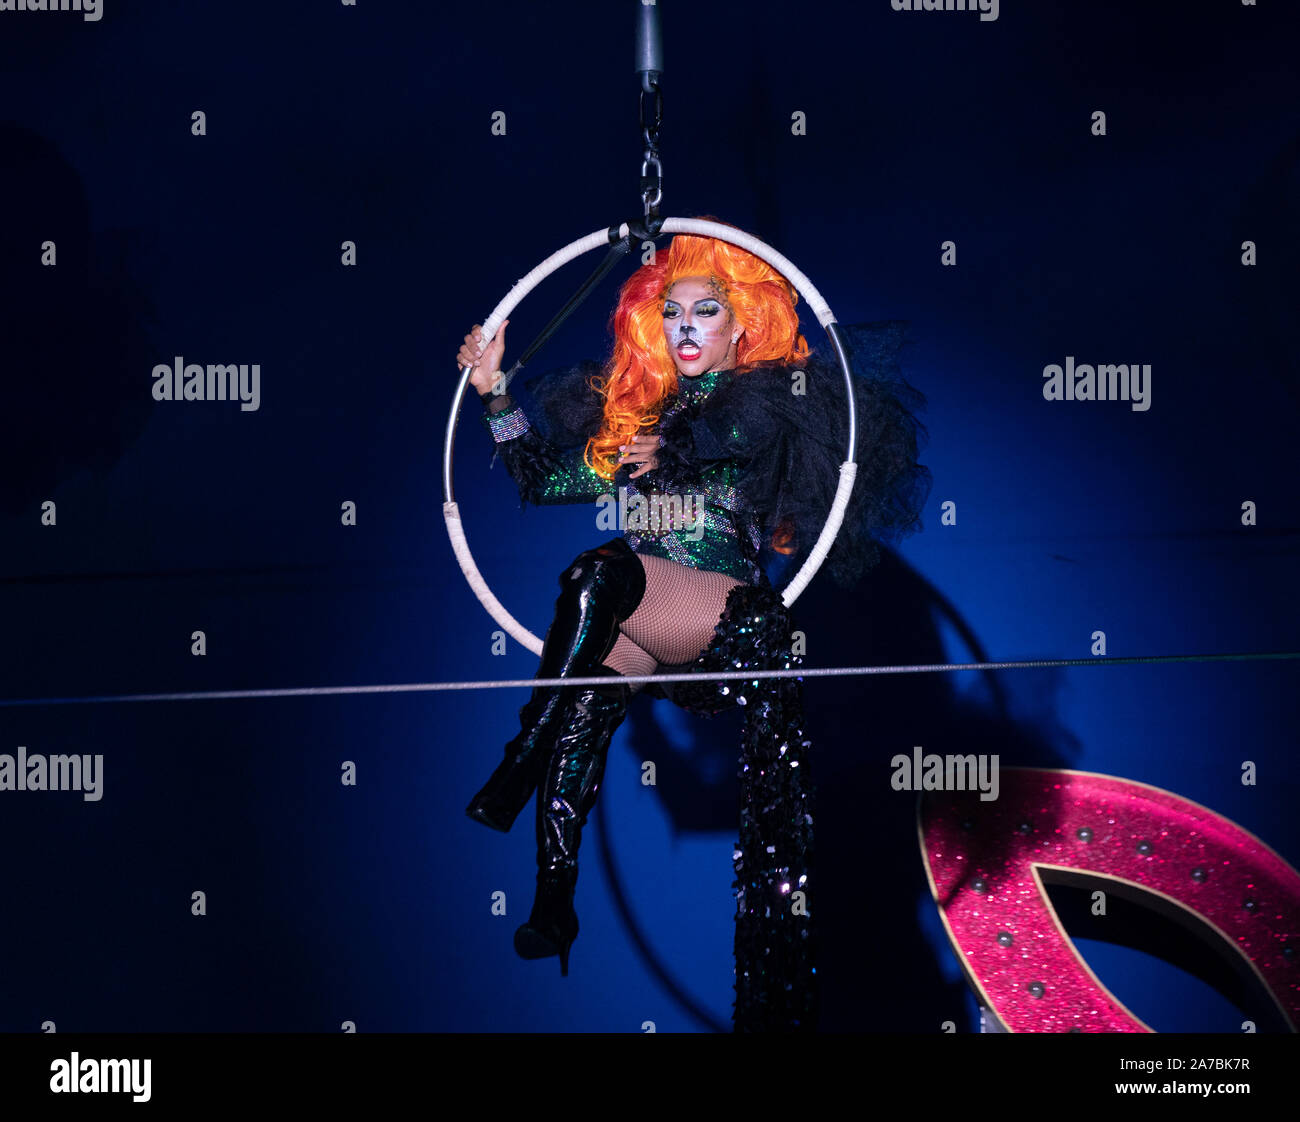 New York, NY - October 31, 2019: Shangela from the House of Wadley performs during Halloween ball at Big Apple Circus at Lincoln Center Stock Photo